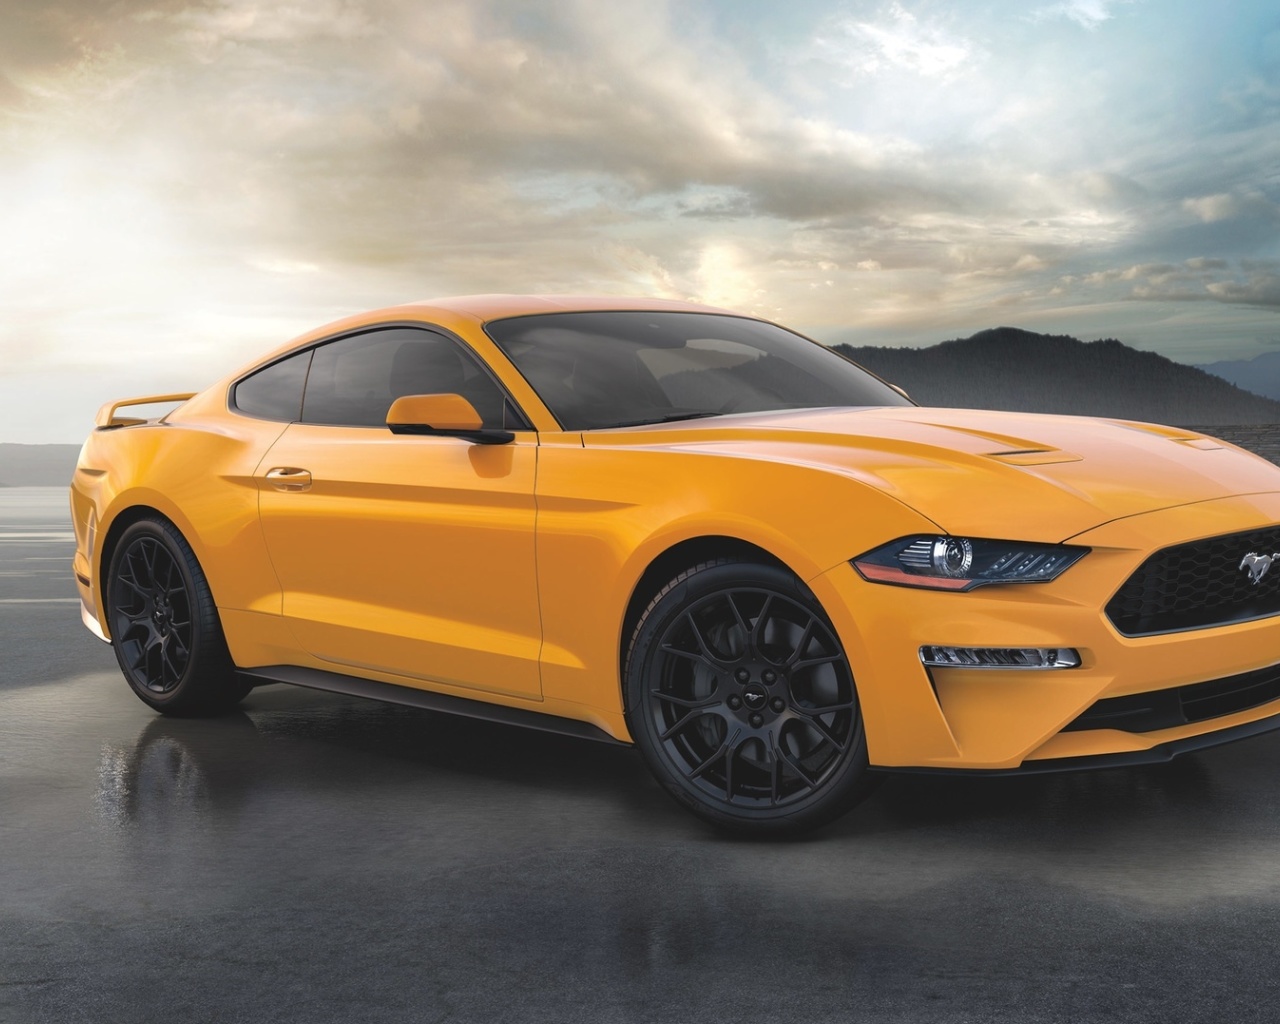 Ford Mustang Coupe wallpaper 1280x1024